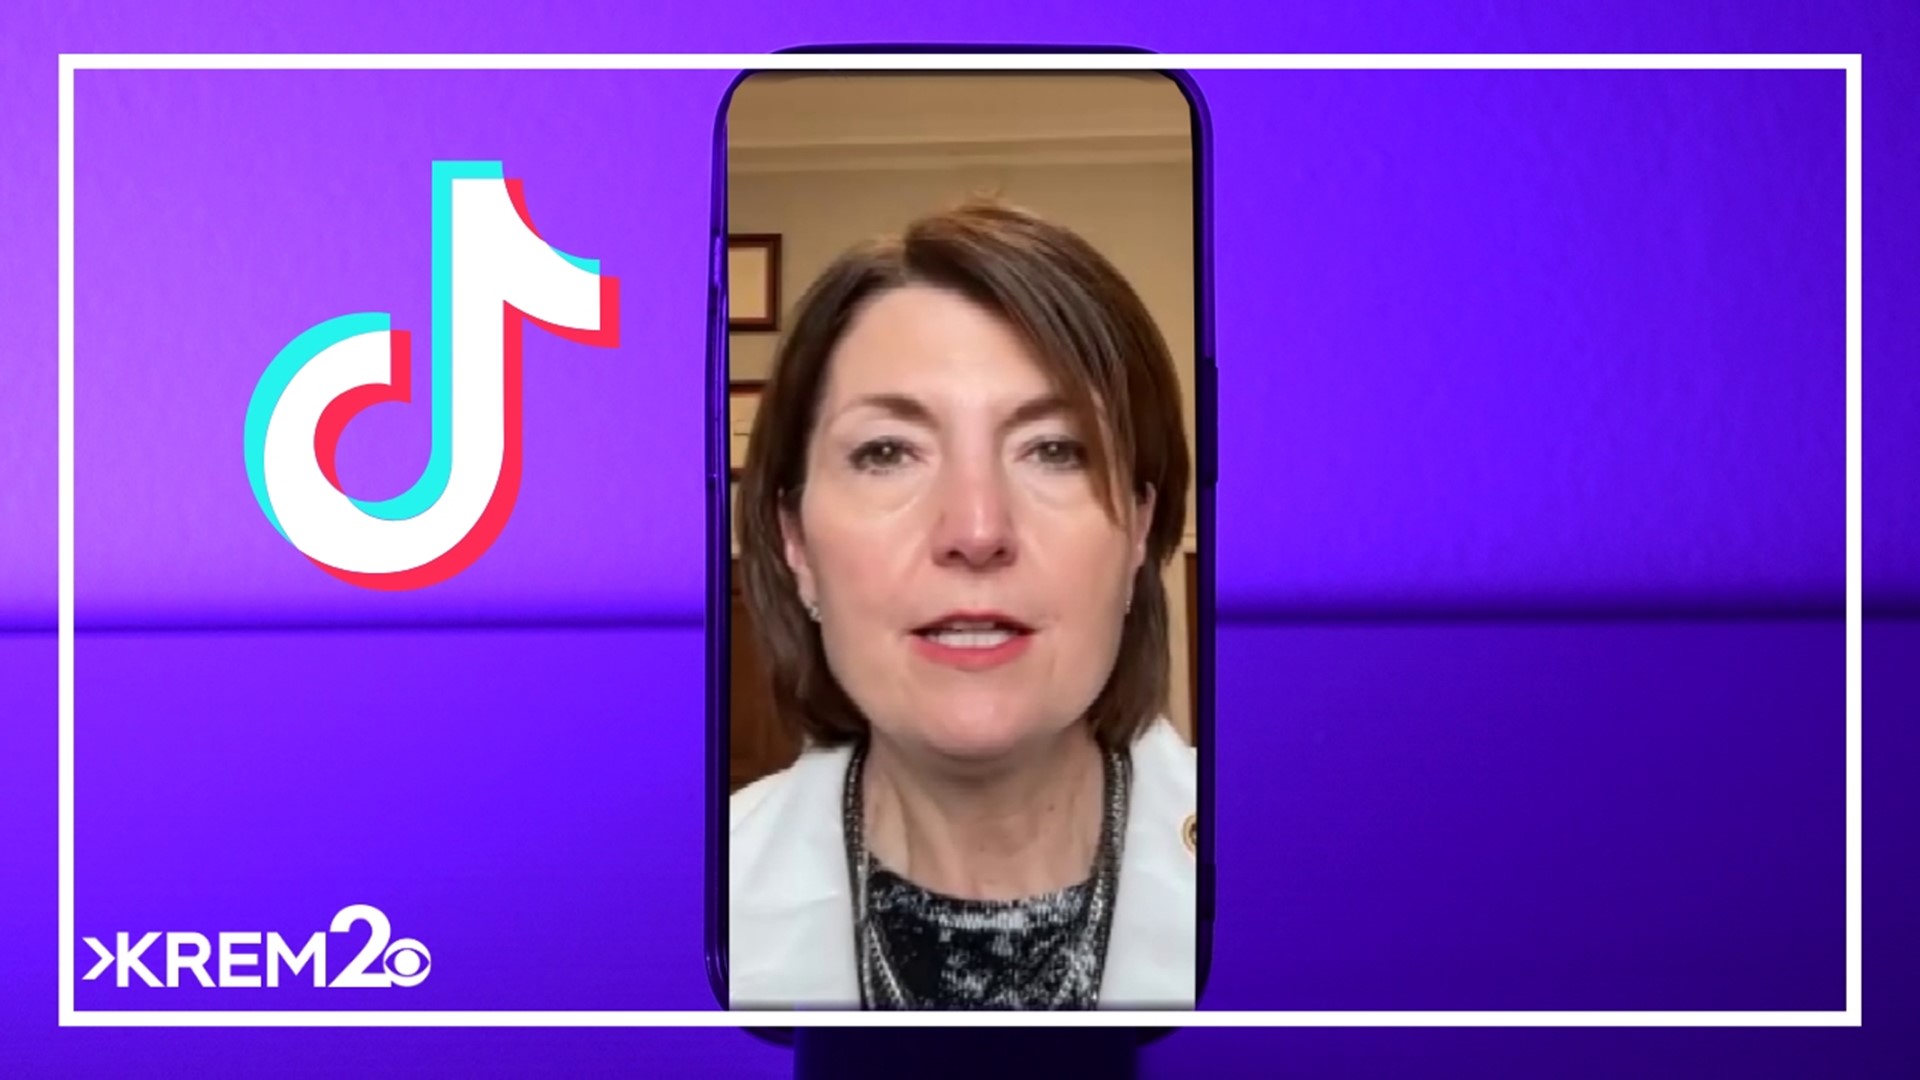 Rep. McMorris Rodgers was one of 352 lawmakers who voted in favor of a bill that would lead to a nationwide ban of TikTok if its China-based owner doesn't sell.